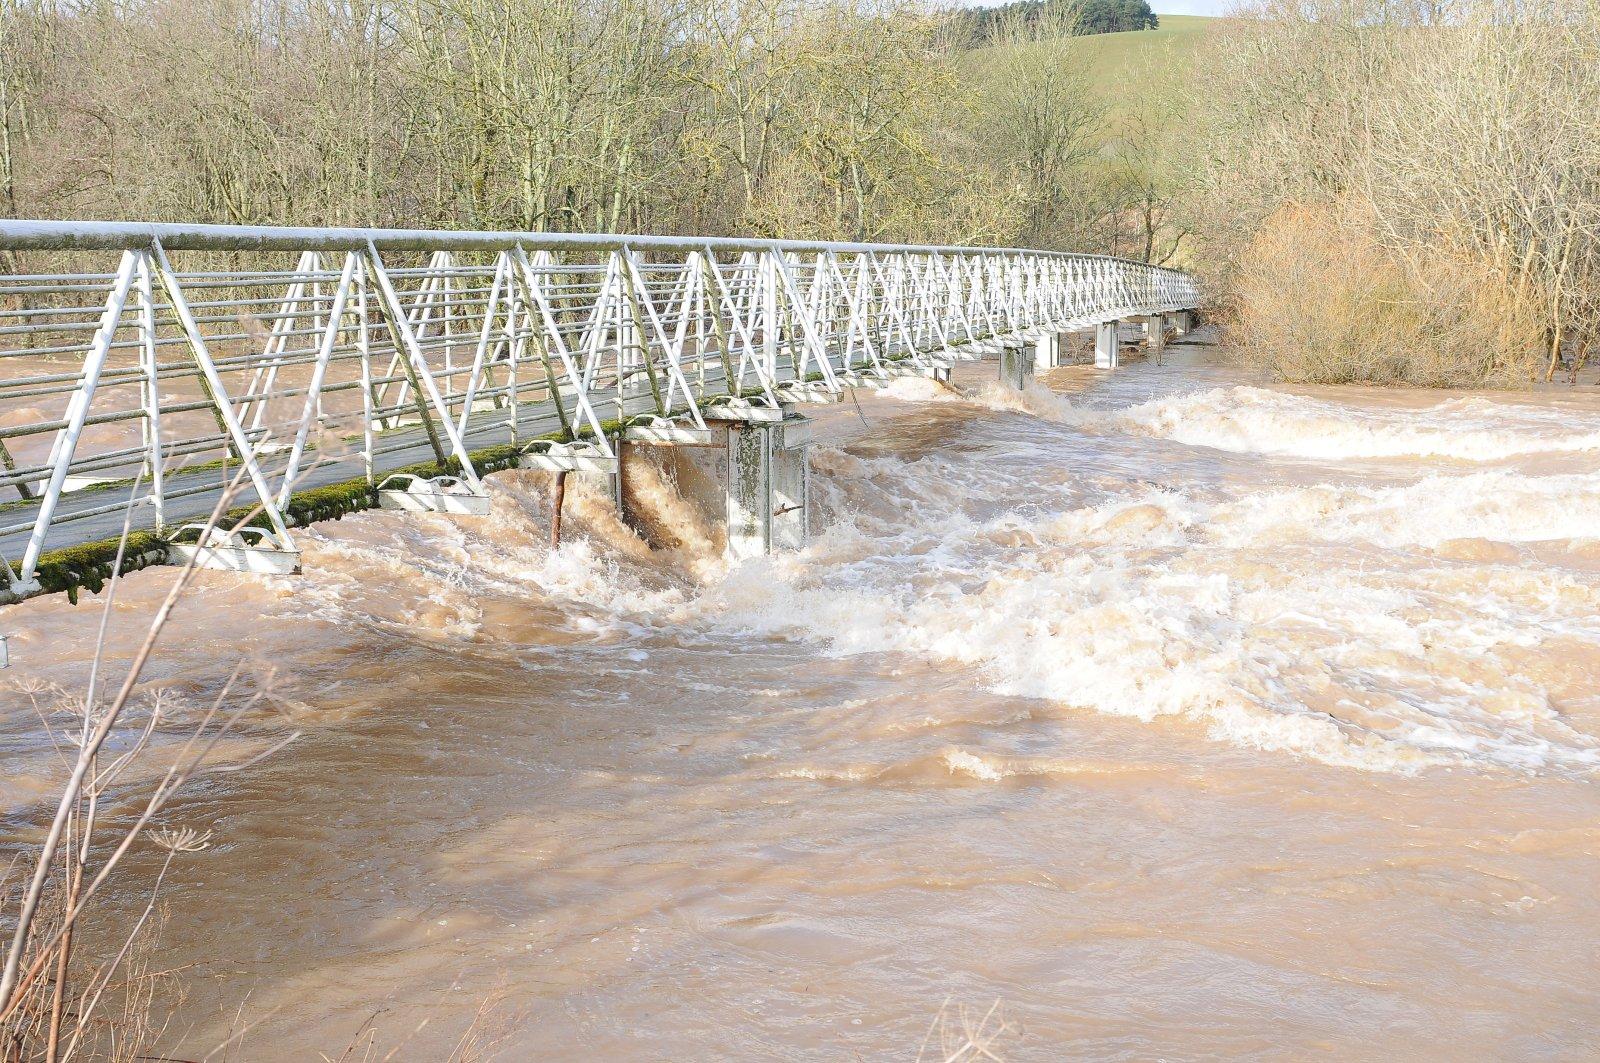 High water at the bottom iron bridge over the Ettrick Water at Selkirk.